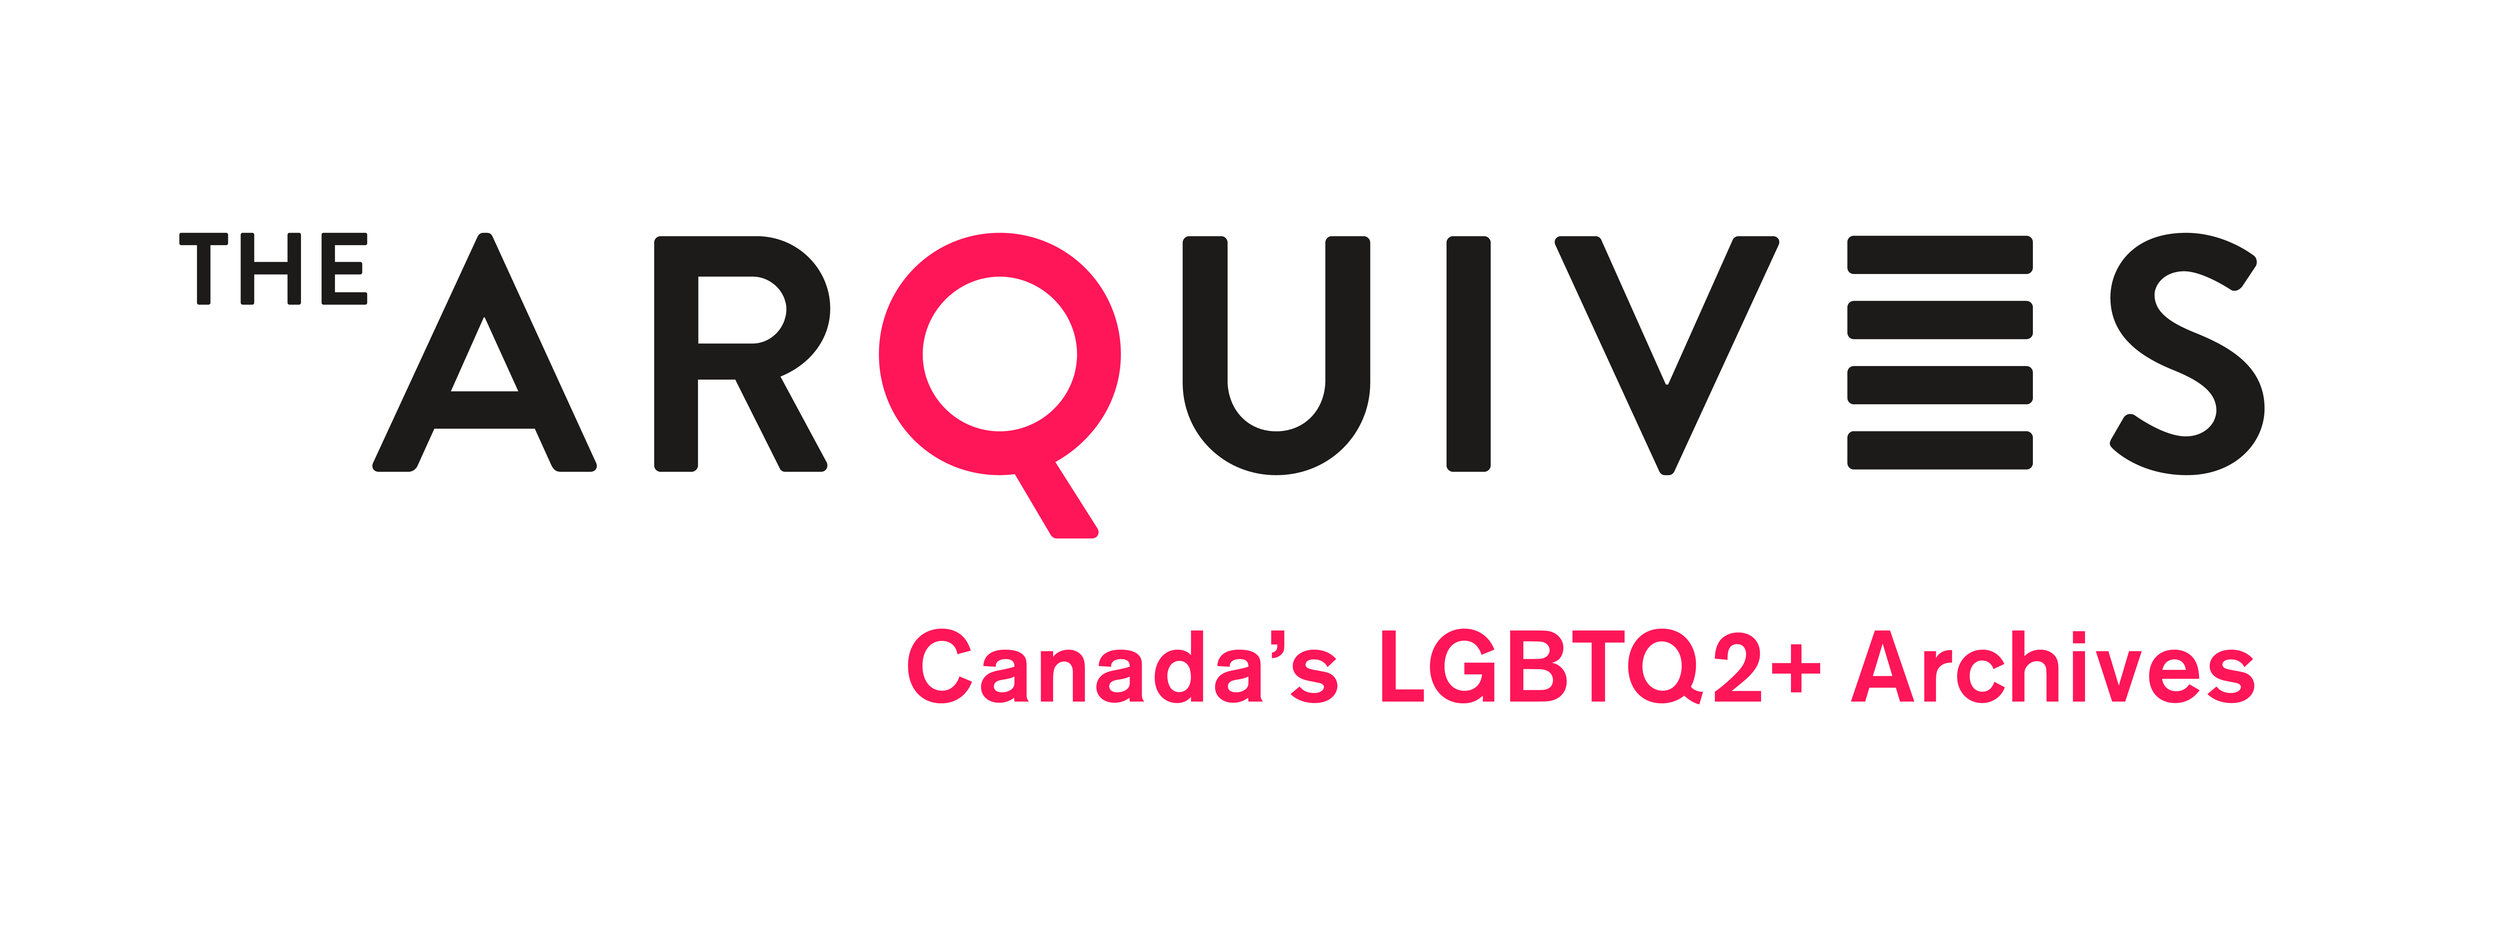 The ArQuives: Canada's LGBTQ2+ Archives (formerly the Canadian Lesbian and Gay Archives)